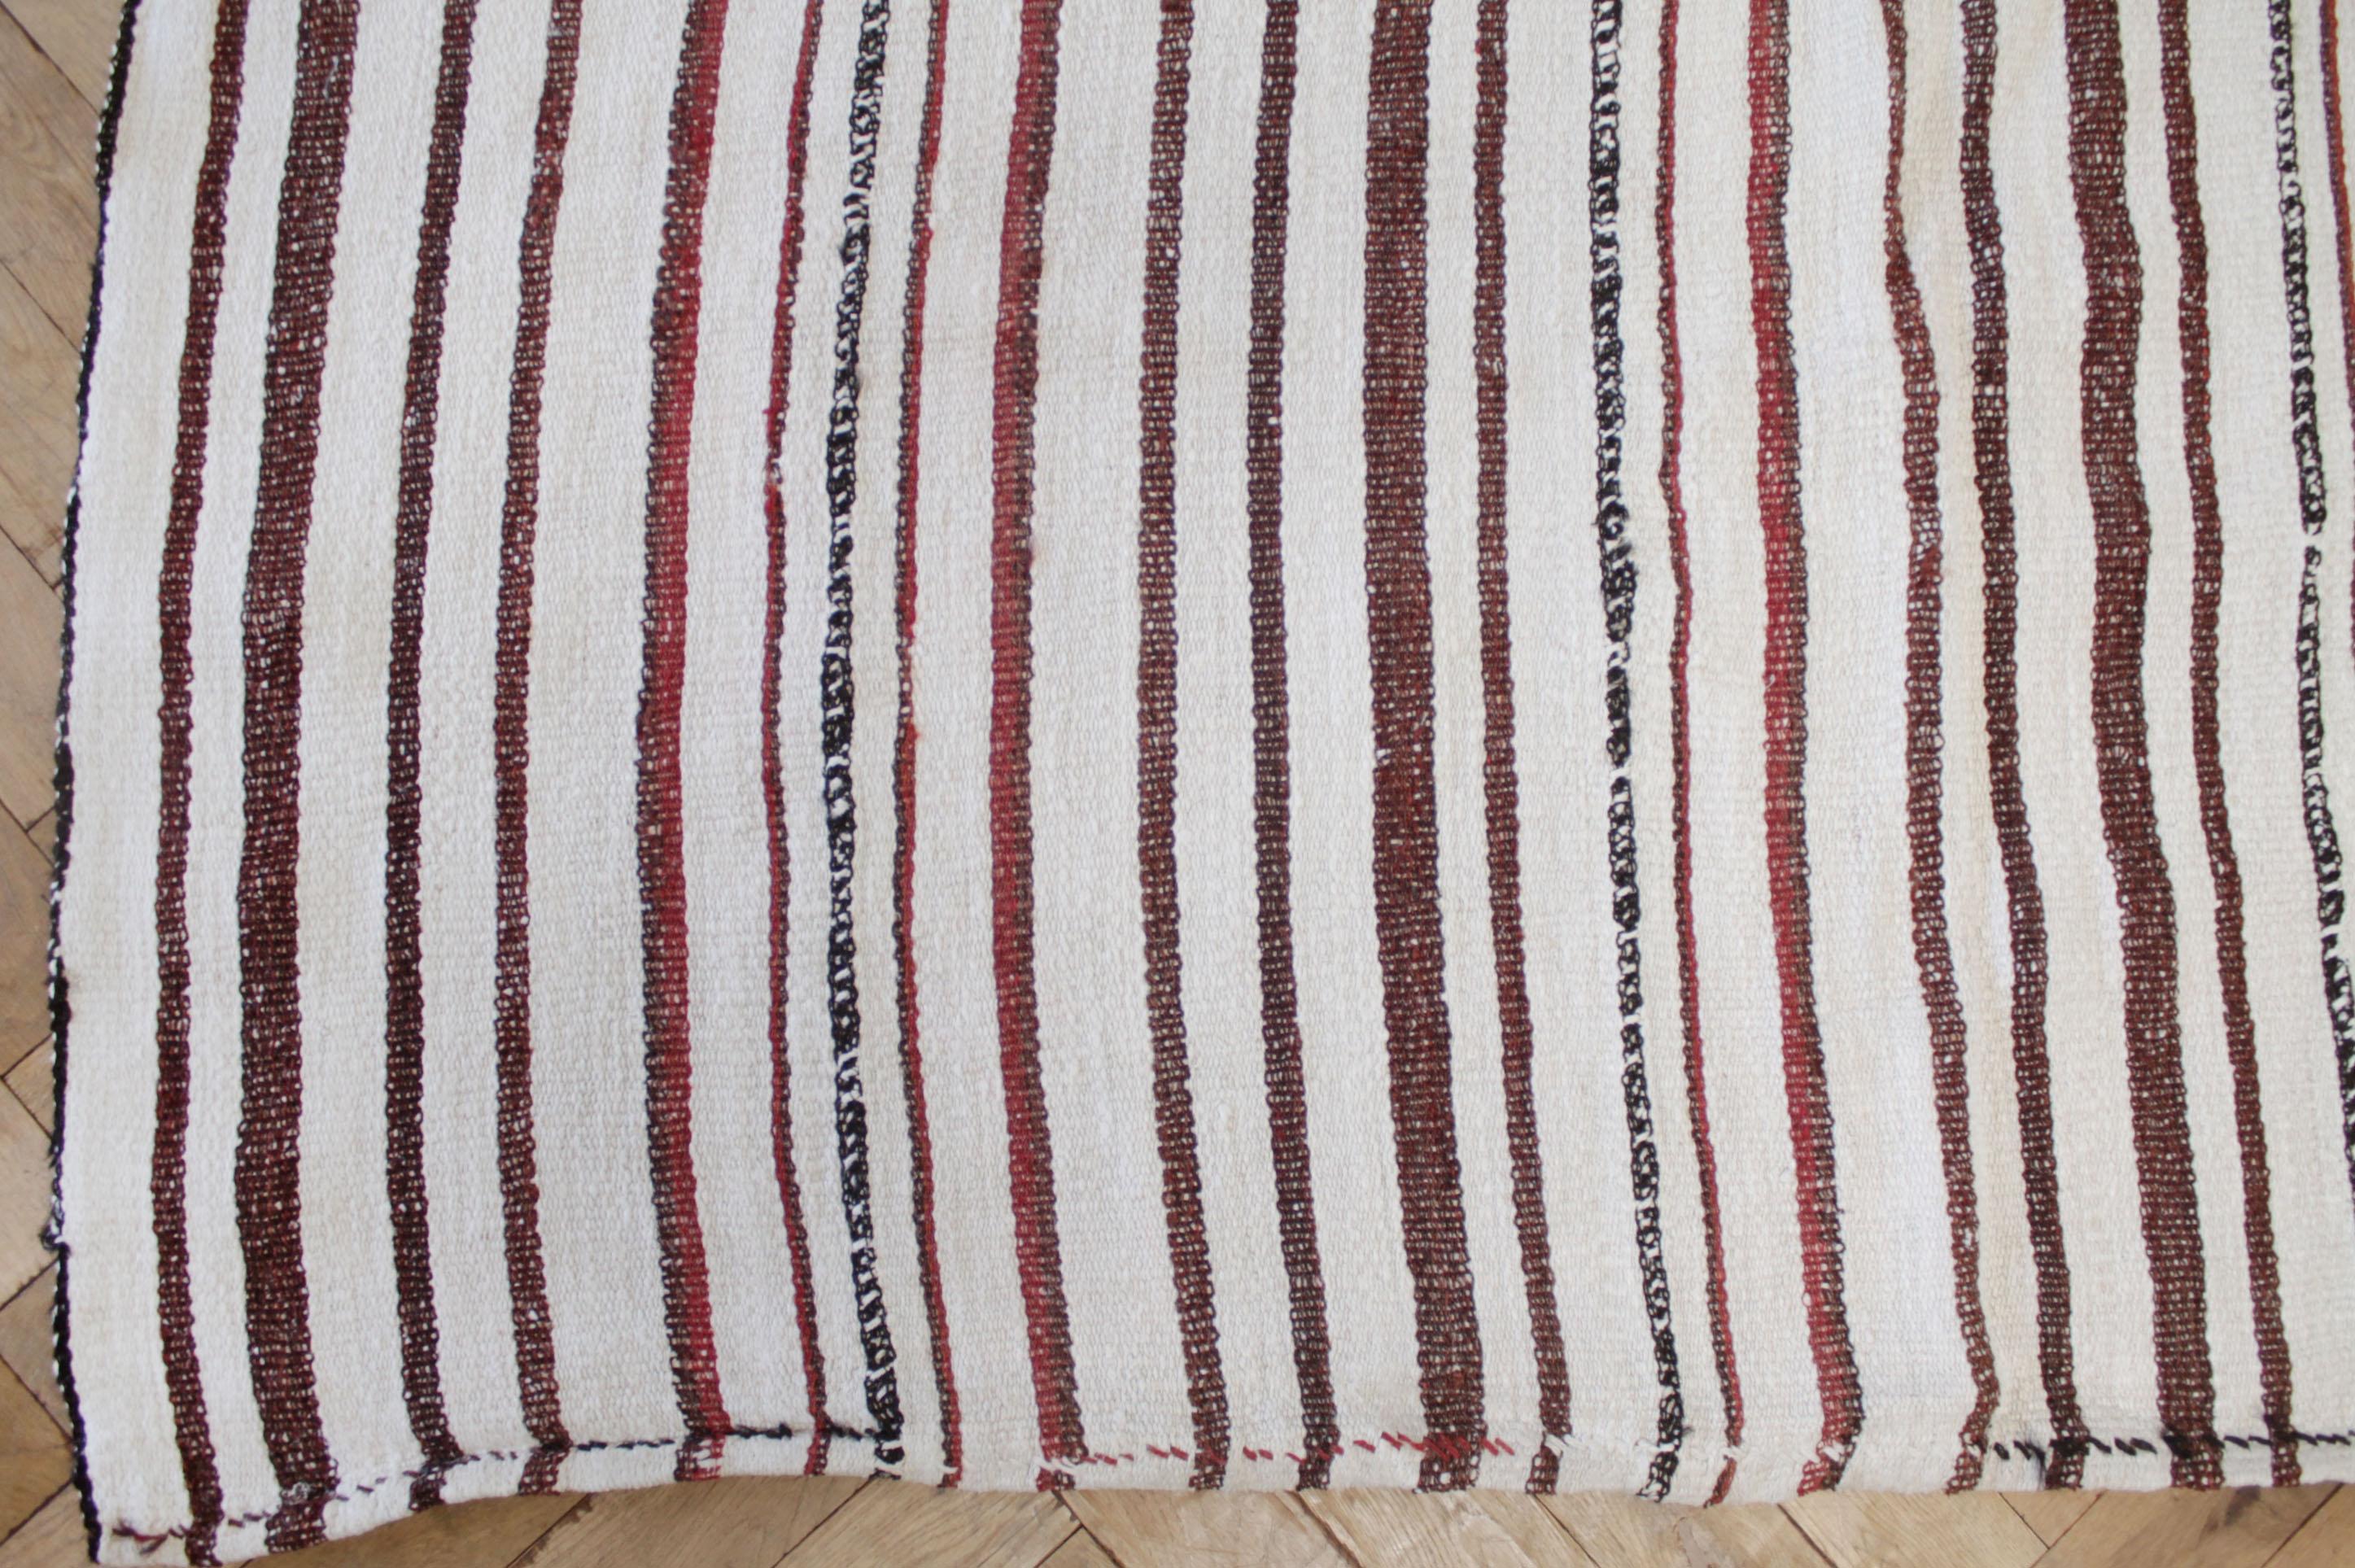 Crimson stripe rug
Vintage Turkish rug in off white weave with light to dark brick tone colored stripes.
Our latest collection has arrived from Turkey, these are great to use as a rug, or let us create a custom ottoman for your out of this piece.